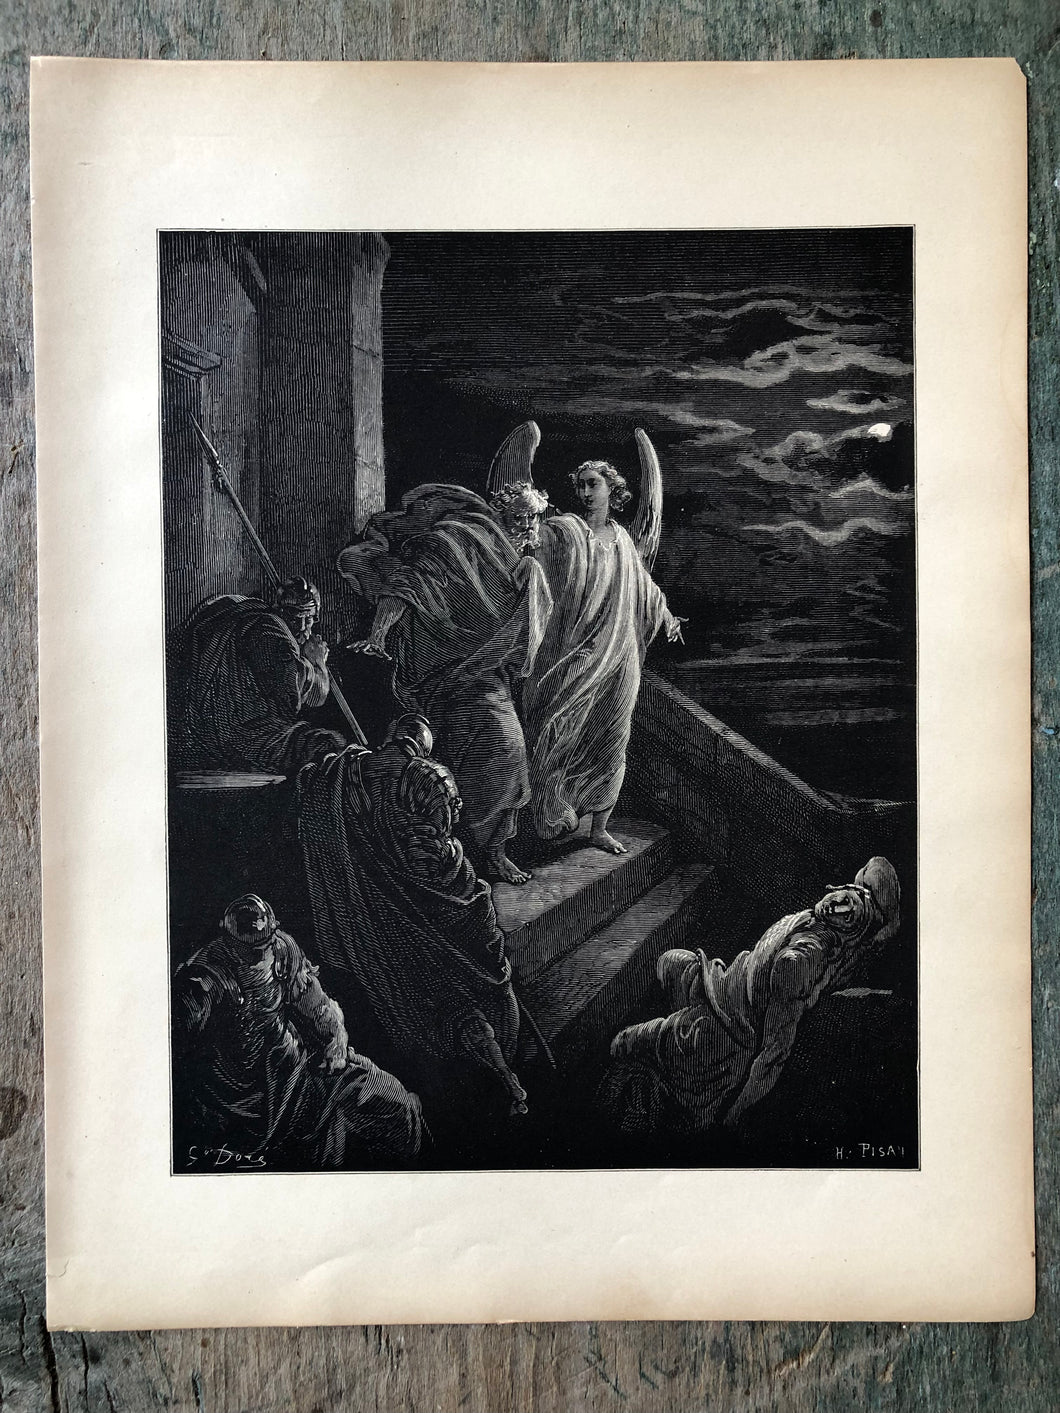 Deliverance of St. Peter. Print from The Dore Bible Gallery by Gustave Dore